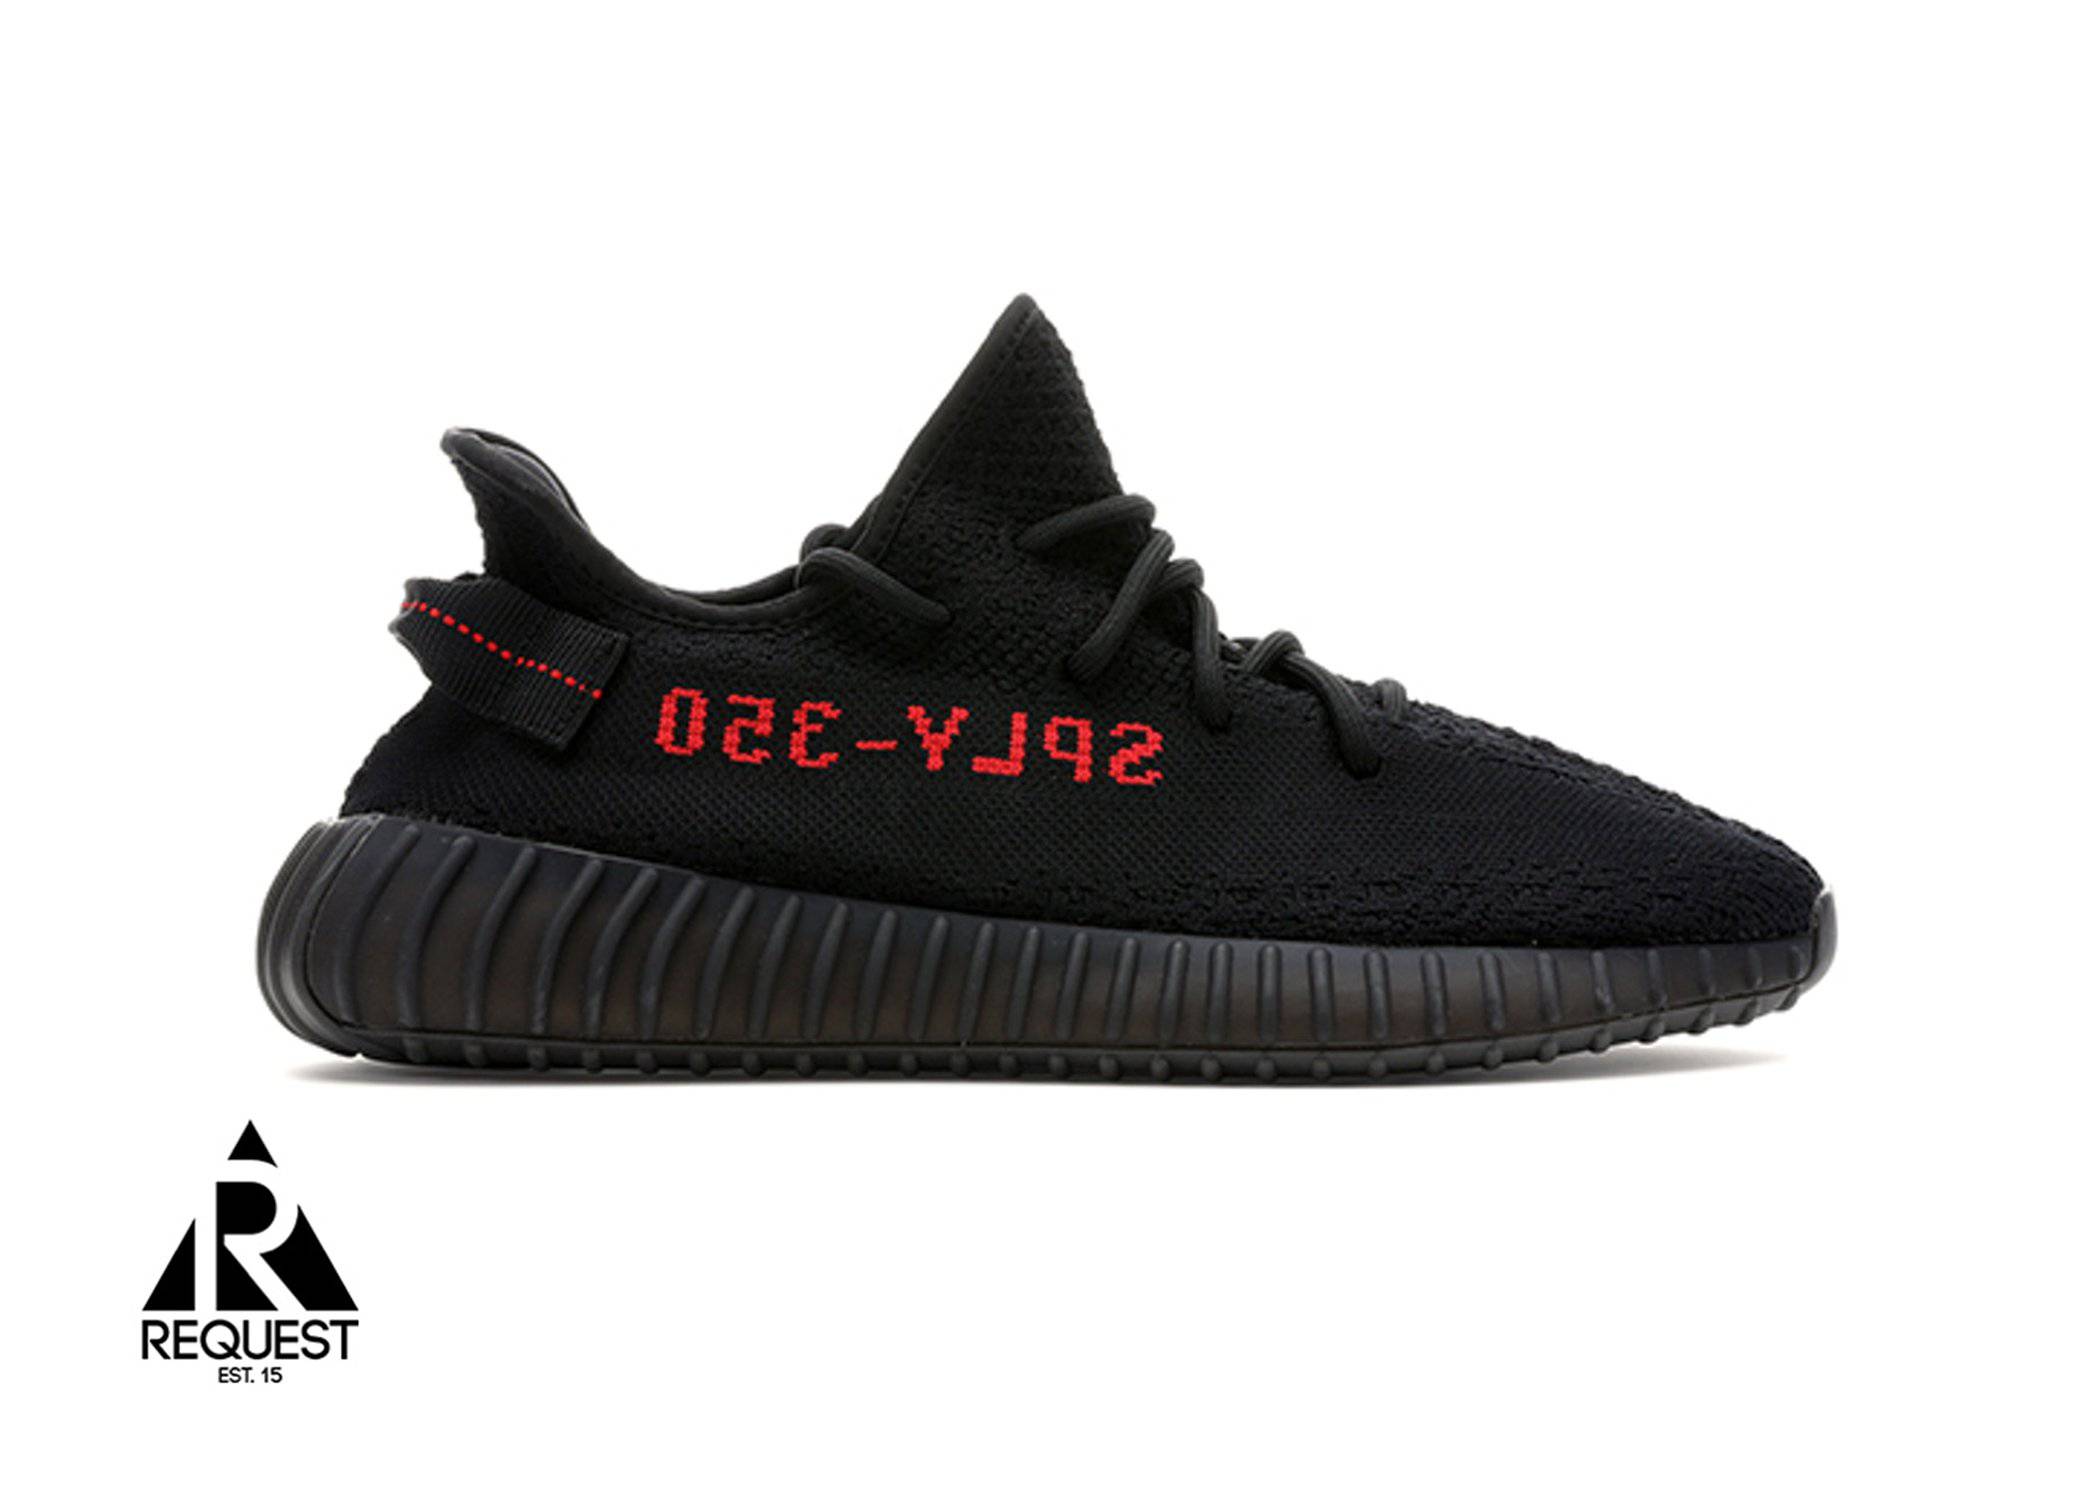 Adidas Yeezy Boost 350 V2 “Bred” | Request